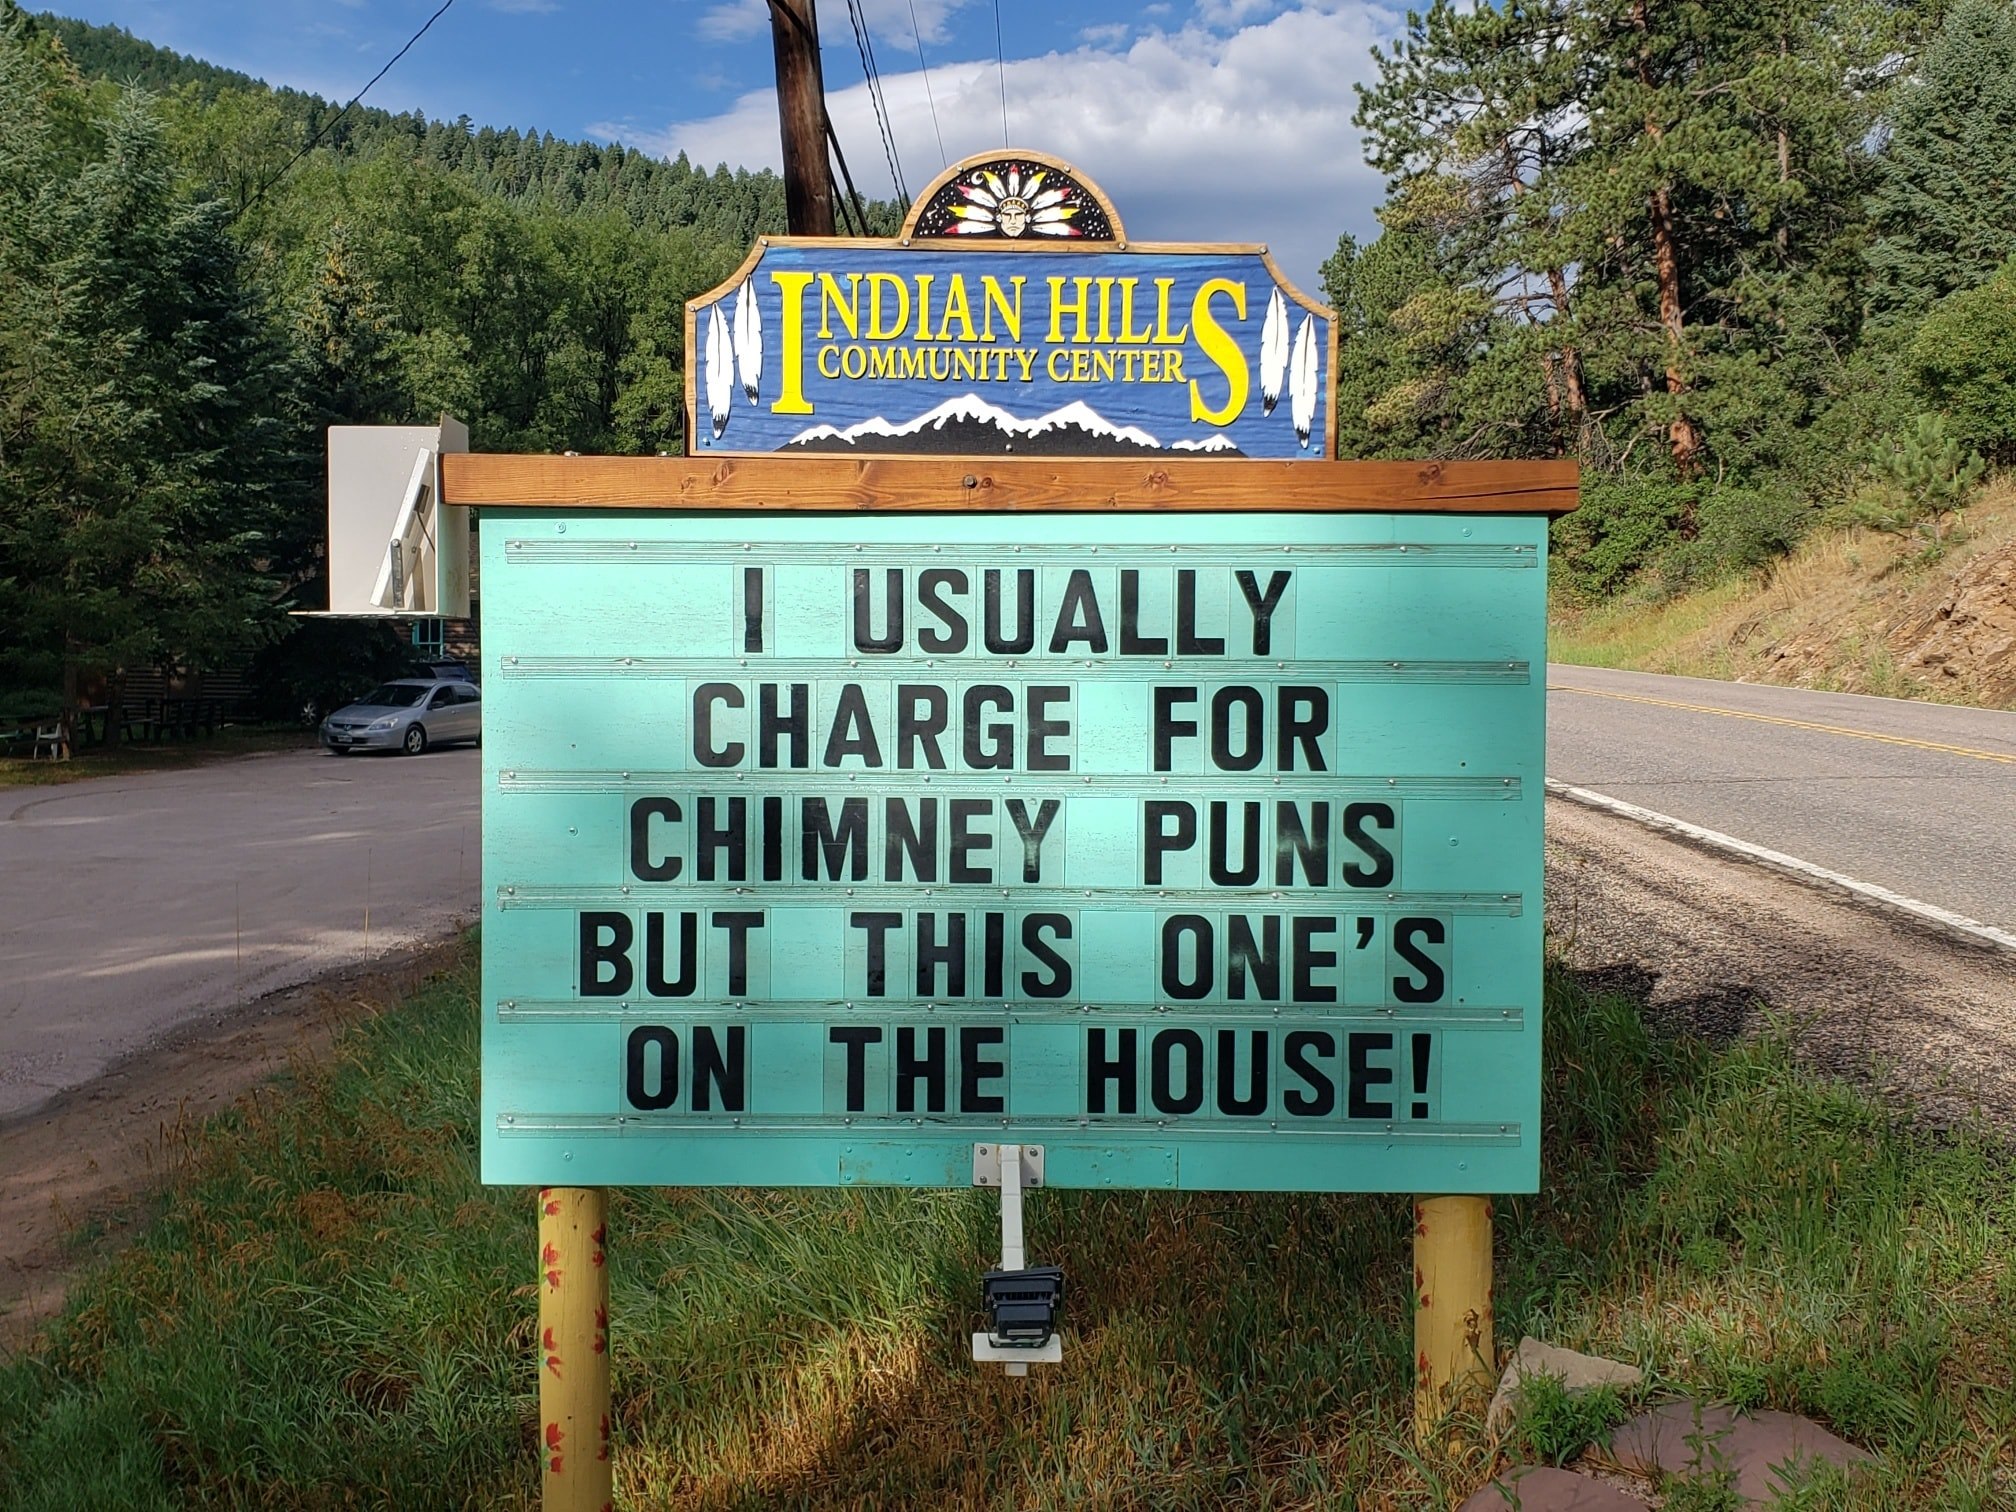 community sign that says: "I usually charge for chimney puns but this one's on the house."